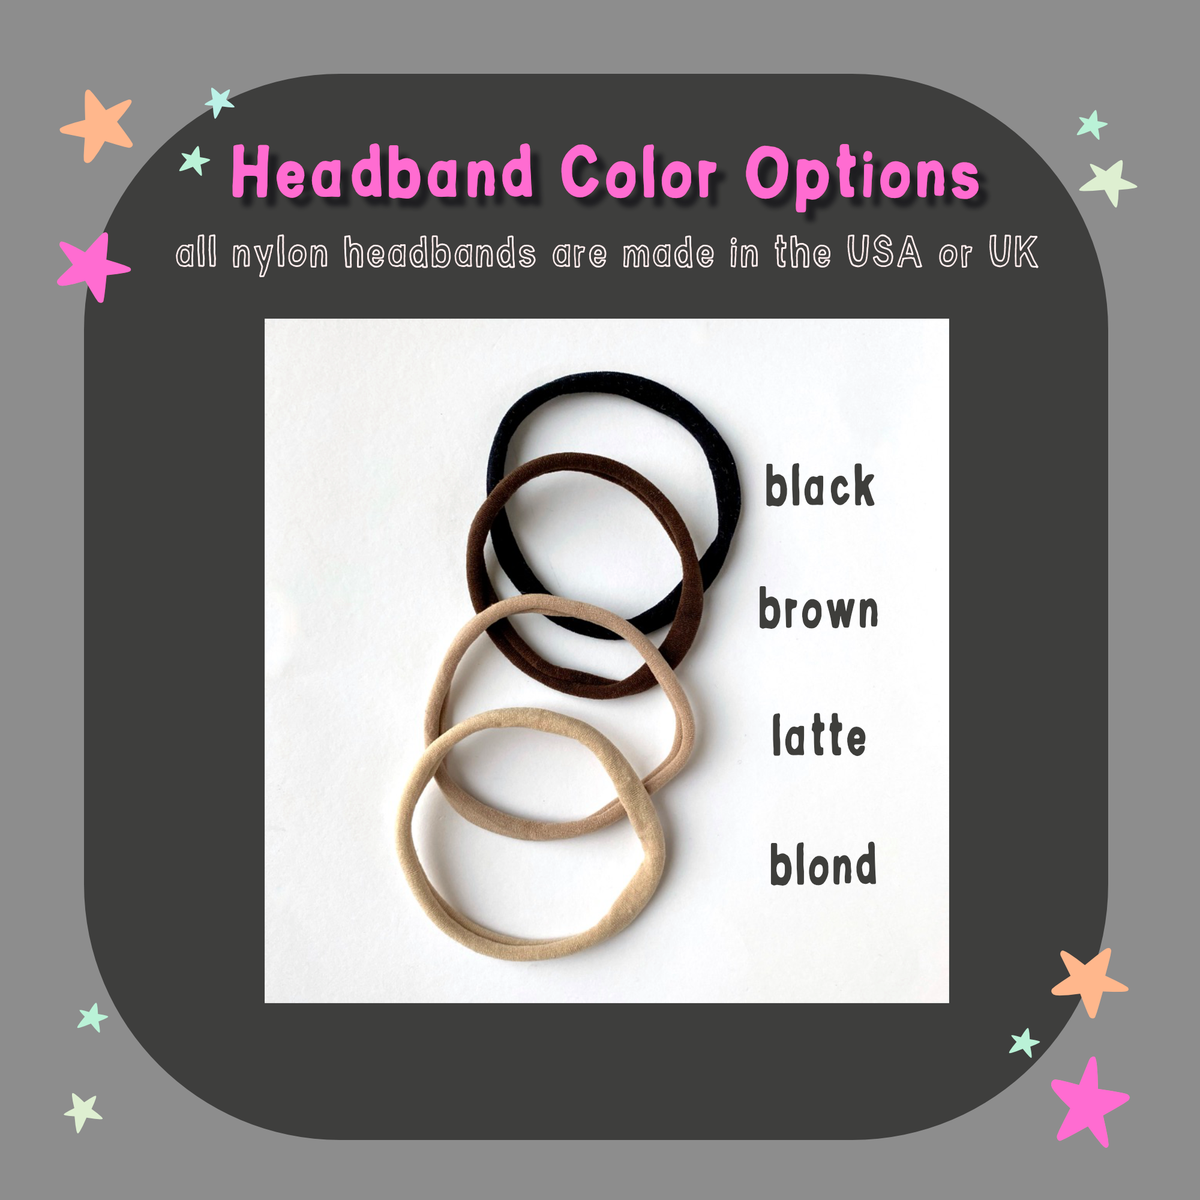 Nylon headband are available in black, brown, latte , or blond color tone.